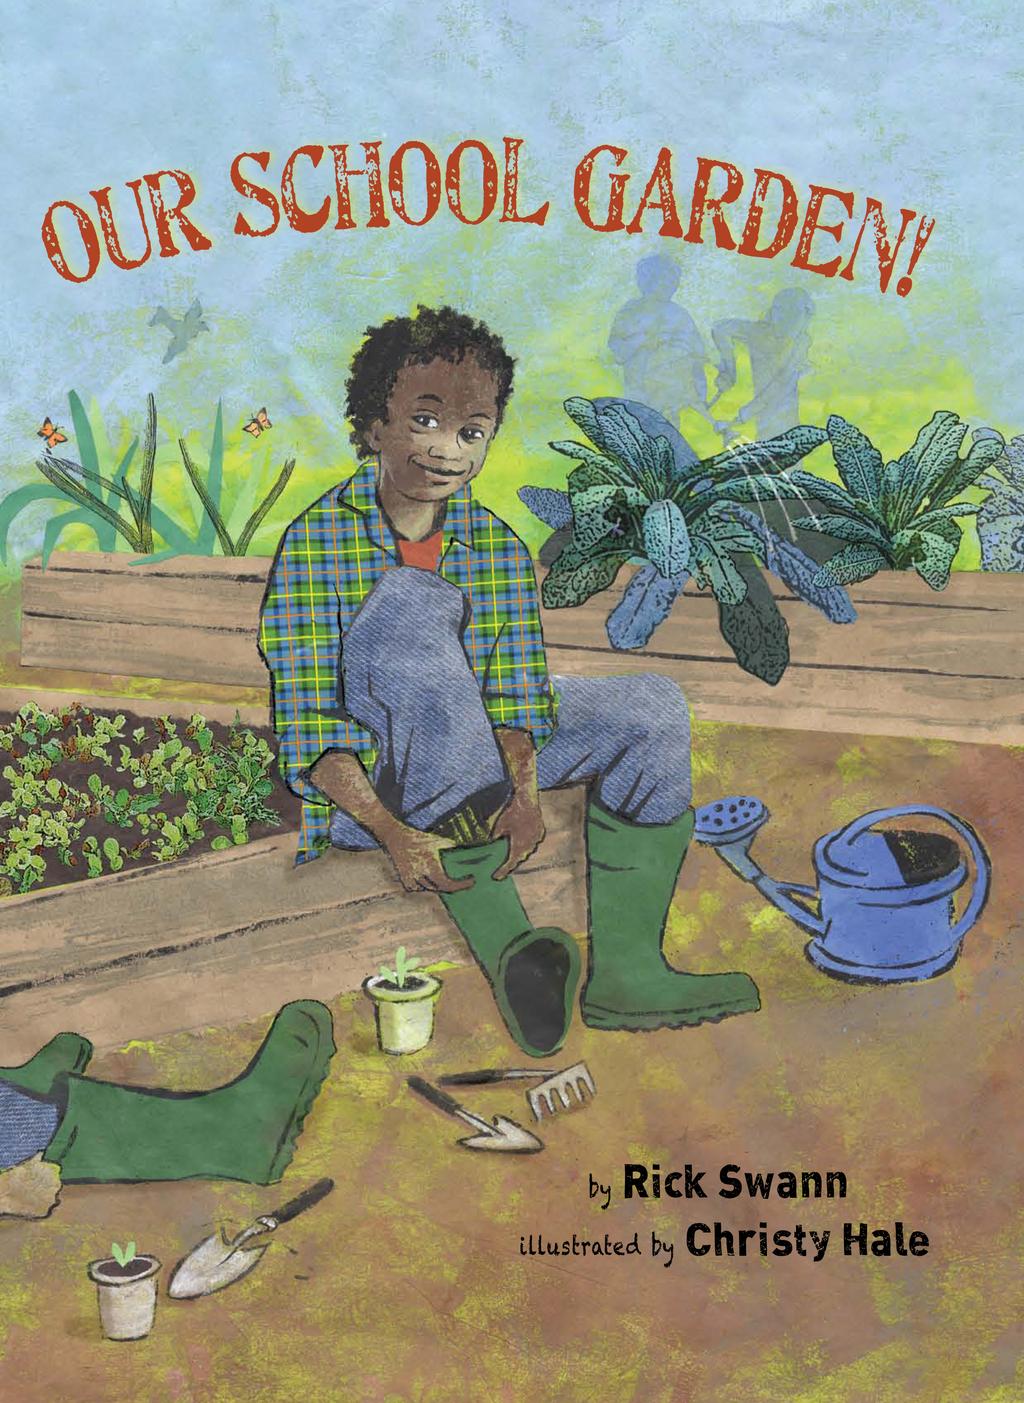 Our School Garden! is a fictional story about how young Michael, new to the city and the school, experiences the garden through the changing seasons of the school year.